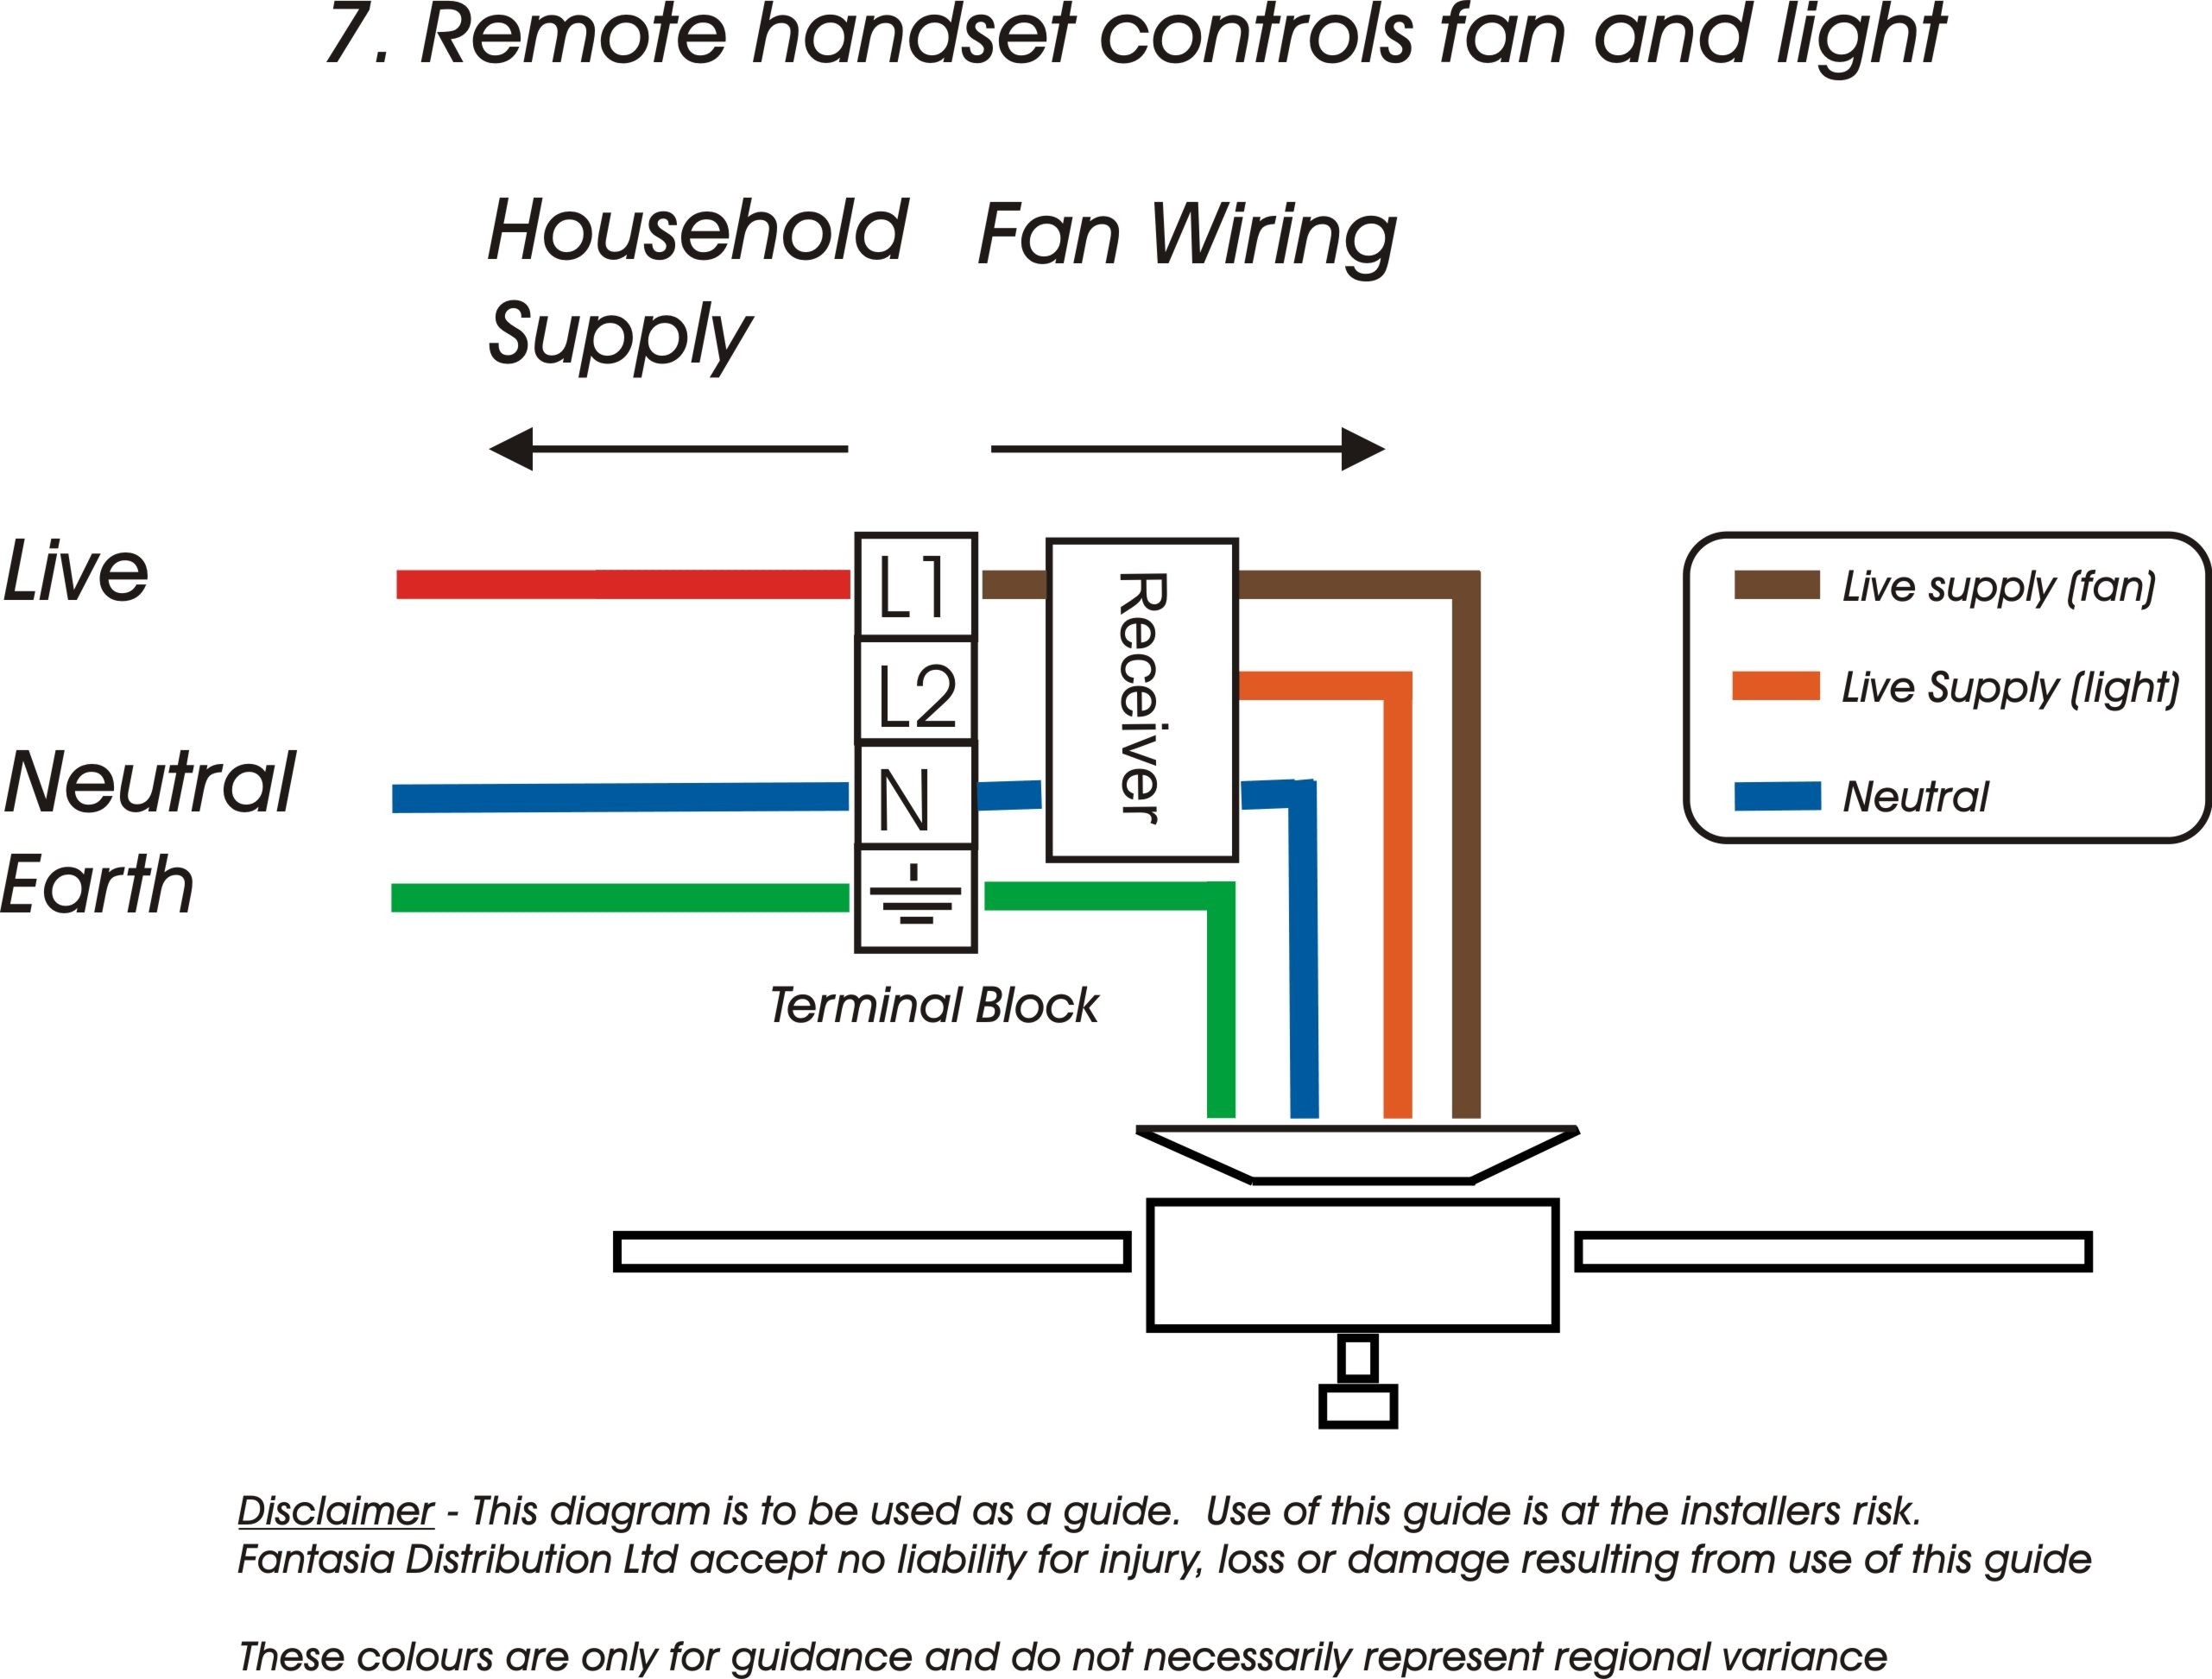 Mesmerizing Unique Red Luxury Ceiling Fan Throughout Harbor Breeze 3 New Speed Switch 4 Wires Diagram